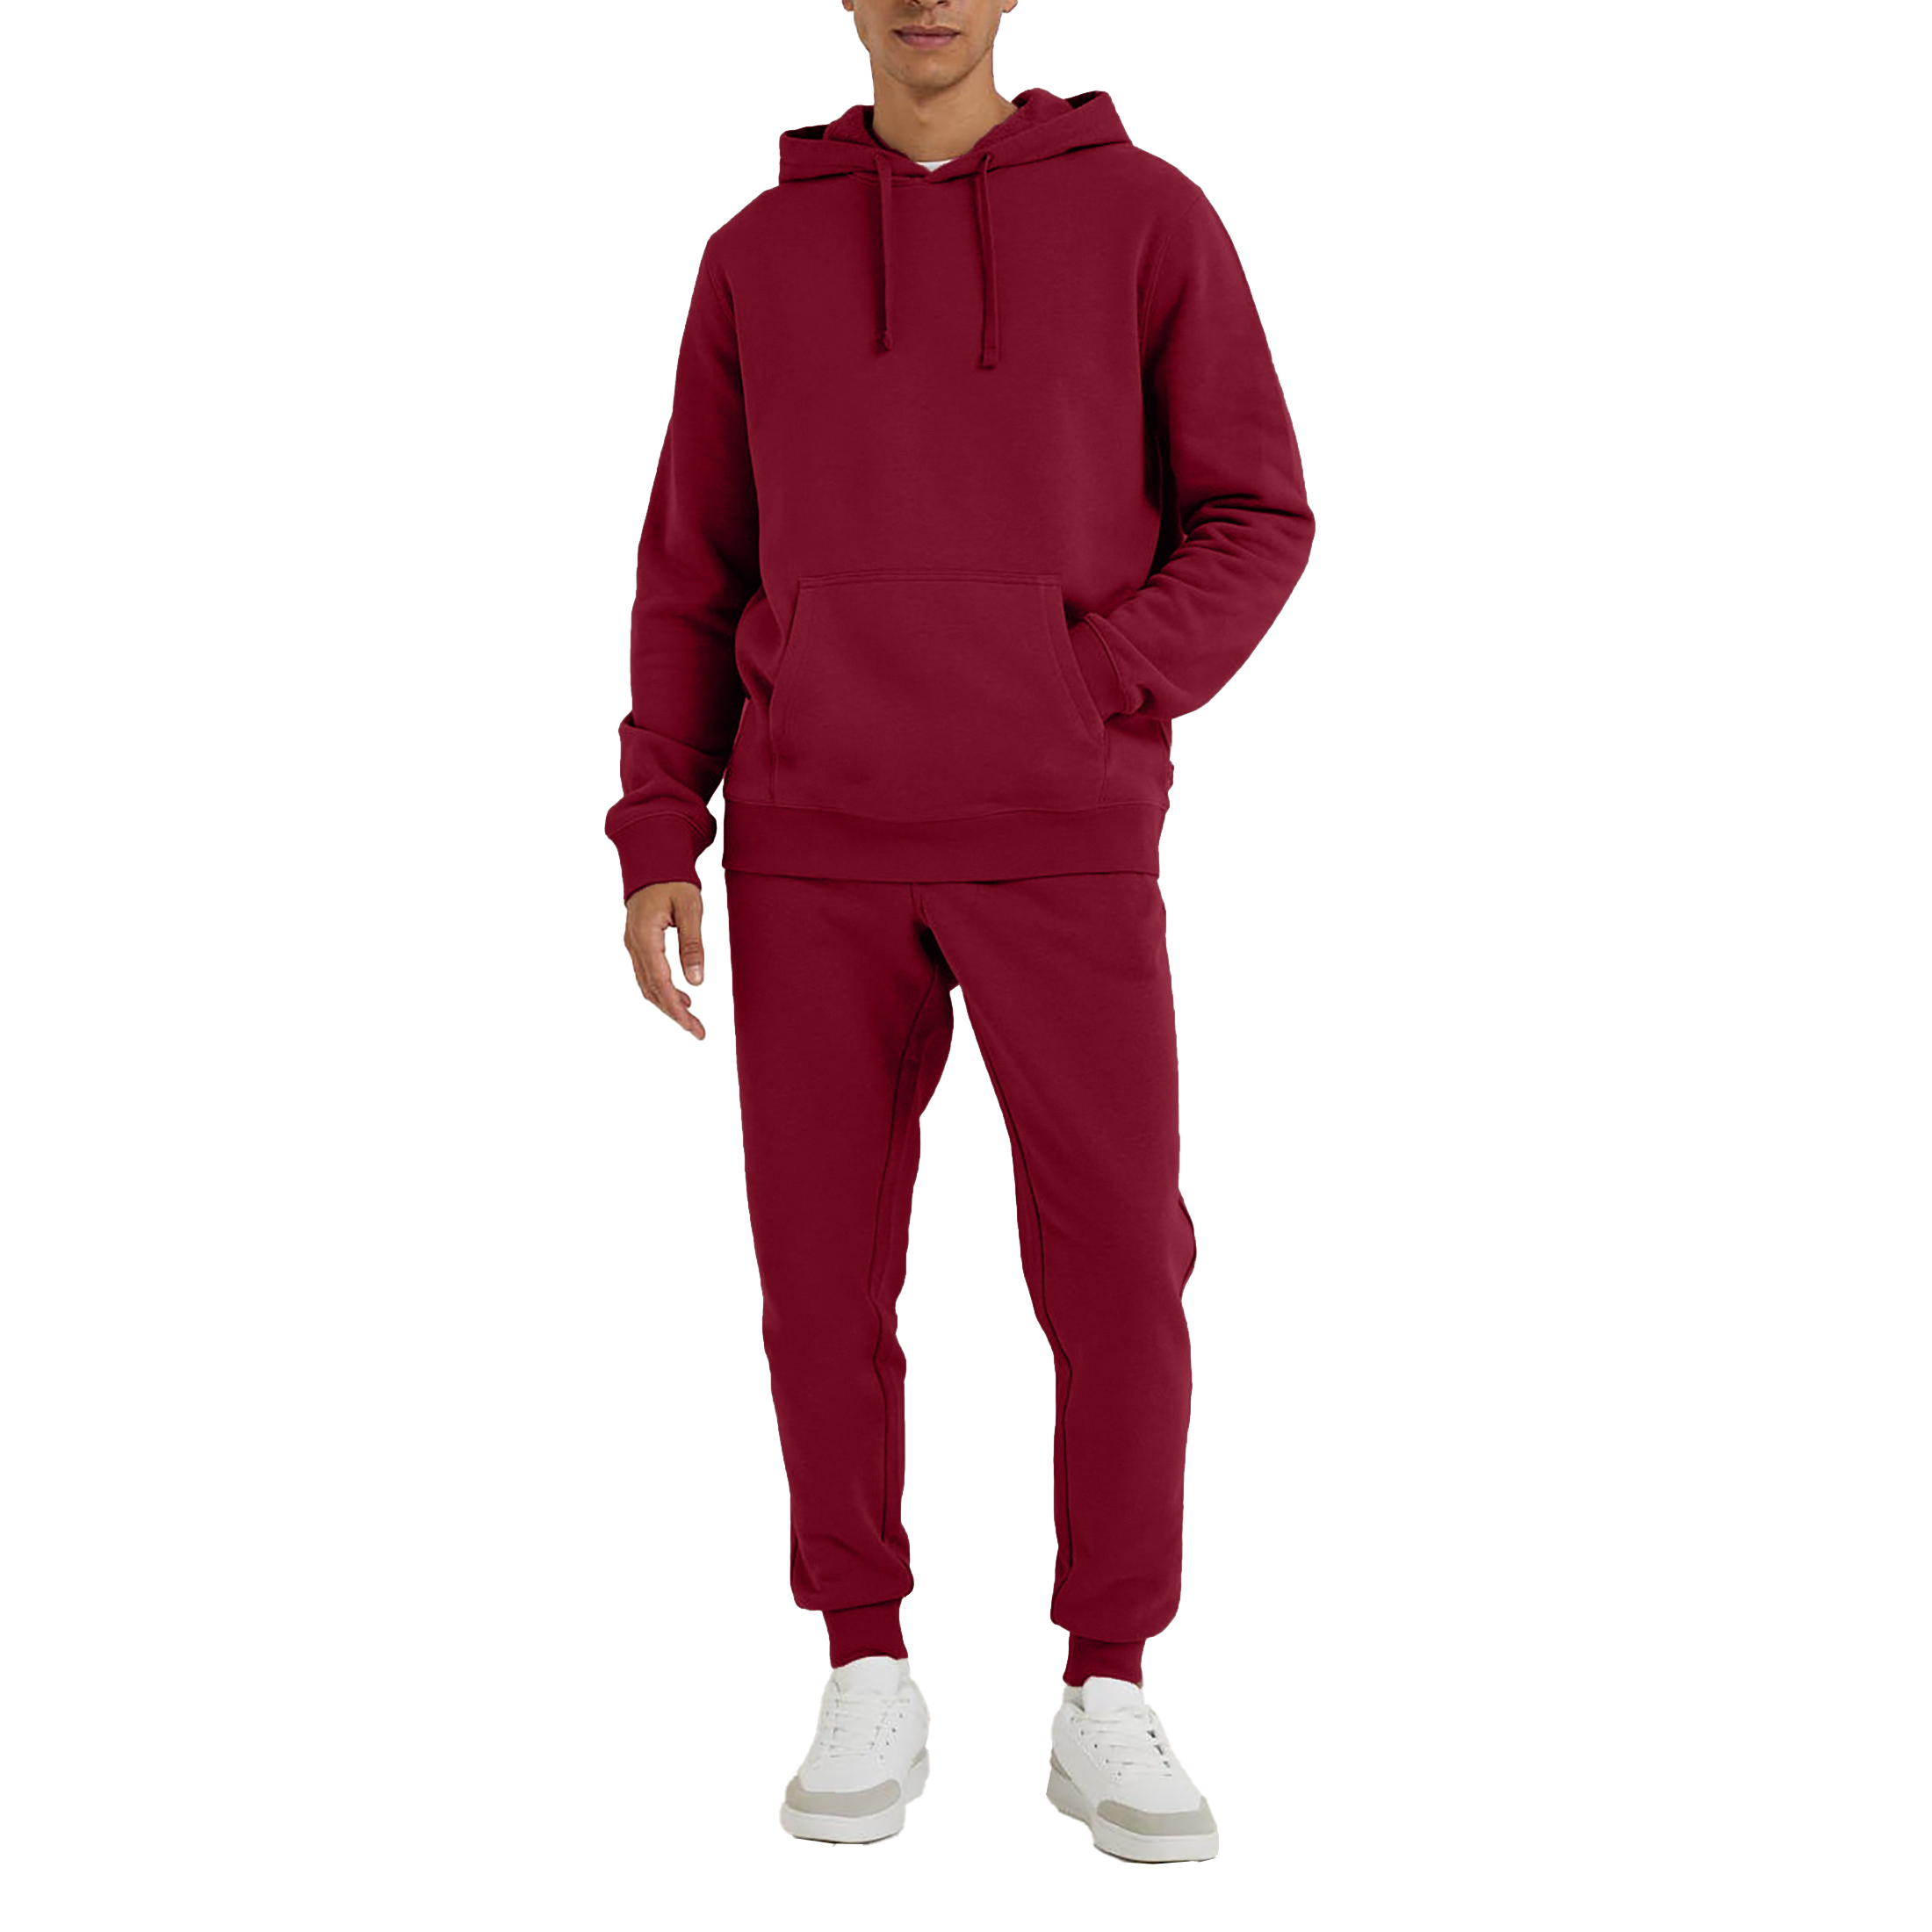 Men's Athletic Warm Jogging Pullover Active Tracksuit - Red, 4X-Large